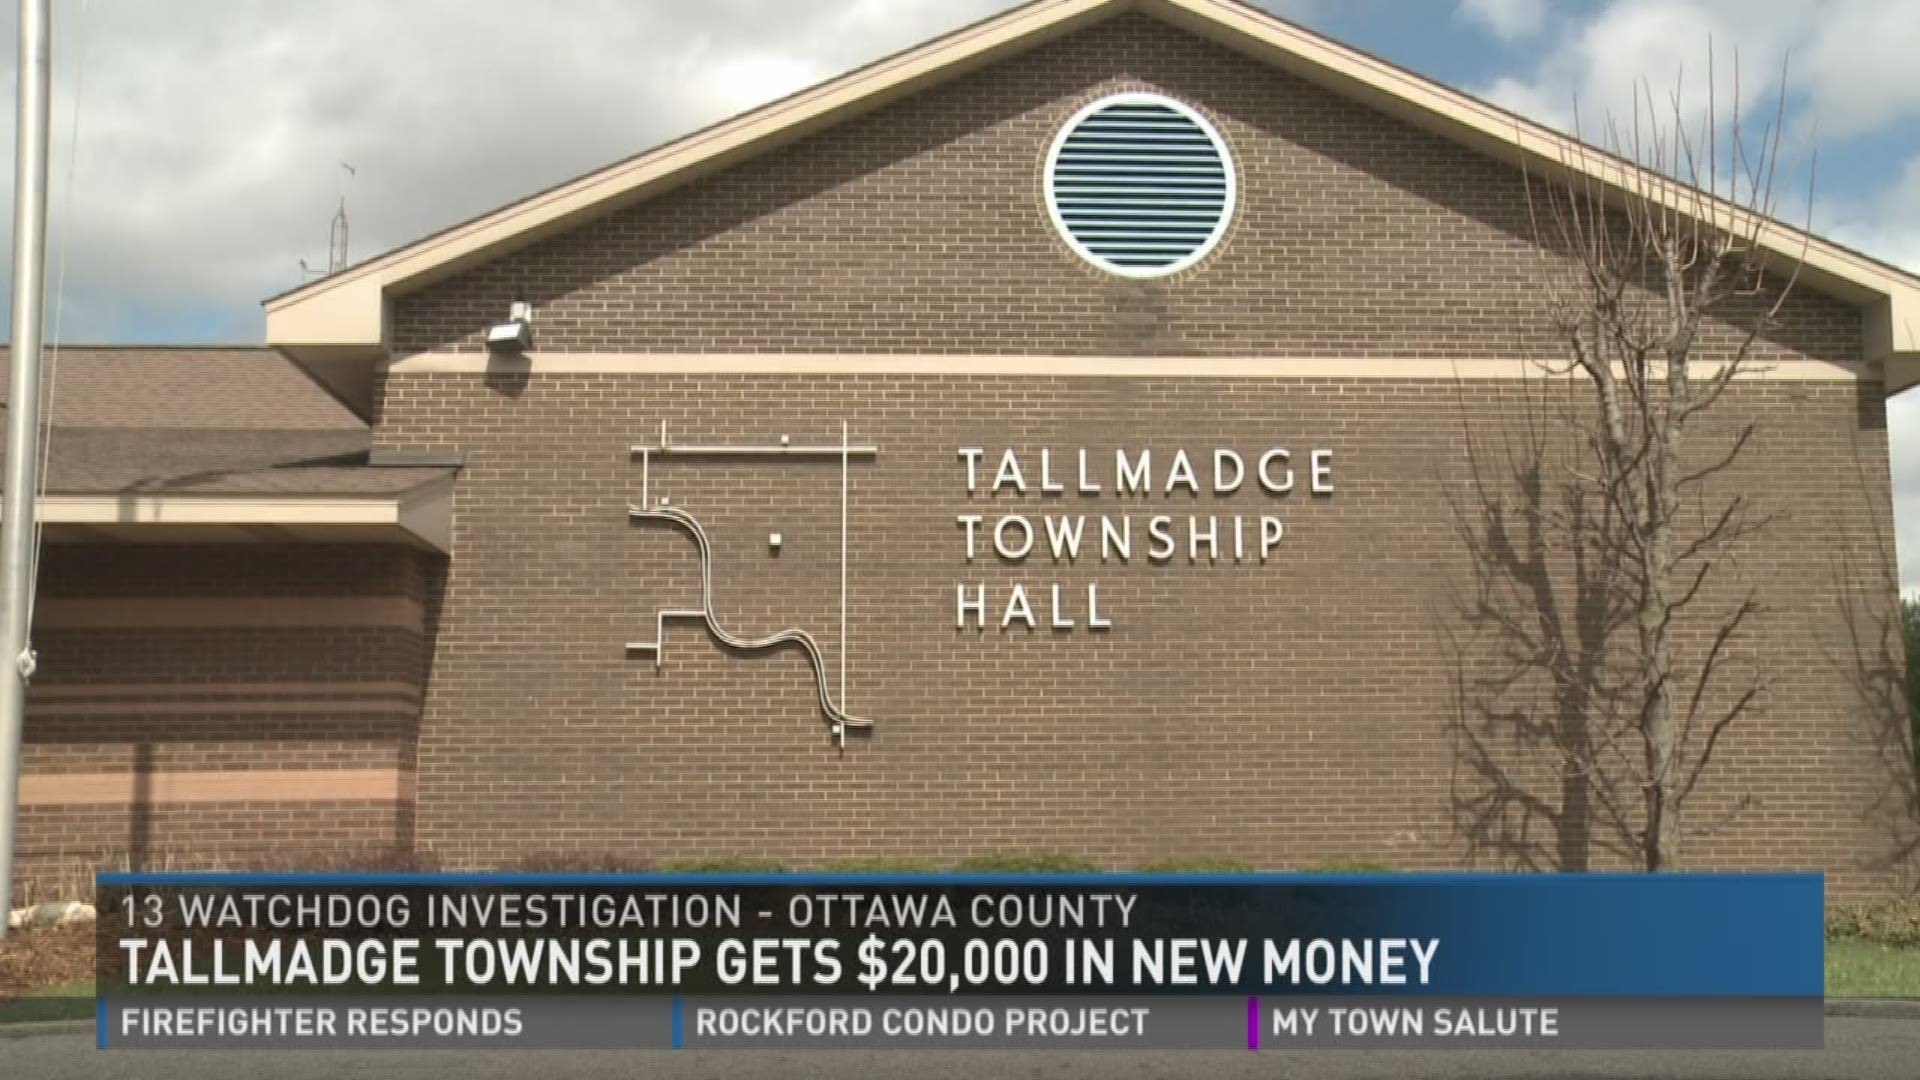 The 13 Watchdogs are confirming that Tallmadge Township was able to get more than $20,000 in state funding after we prompted township workers into action in late November of last year.